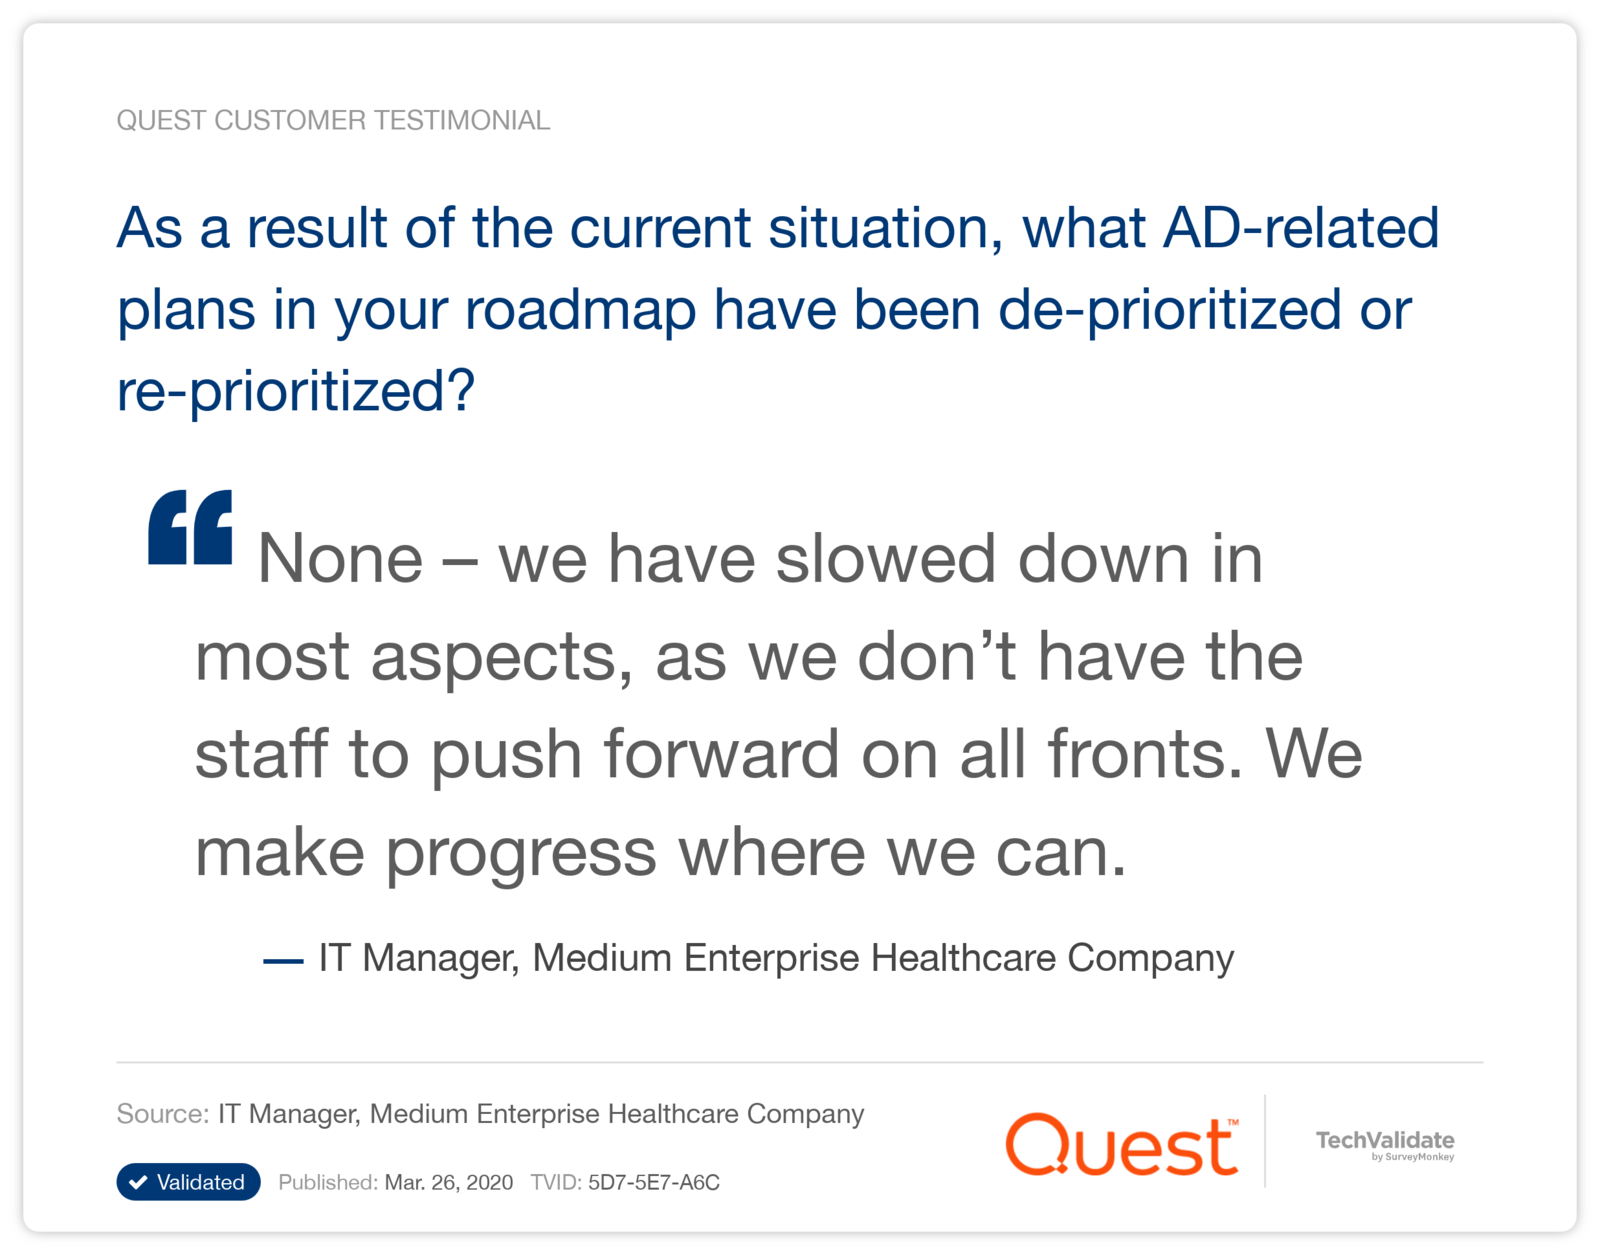 As a result of the current situation, what AD-related plans in your roadmap have been de-prioritized or re-prioritized?